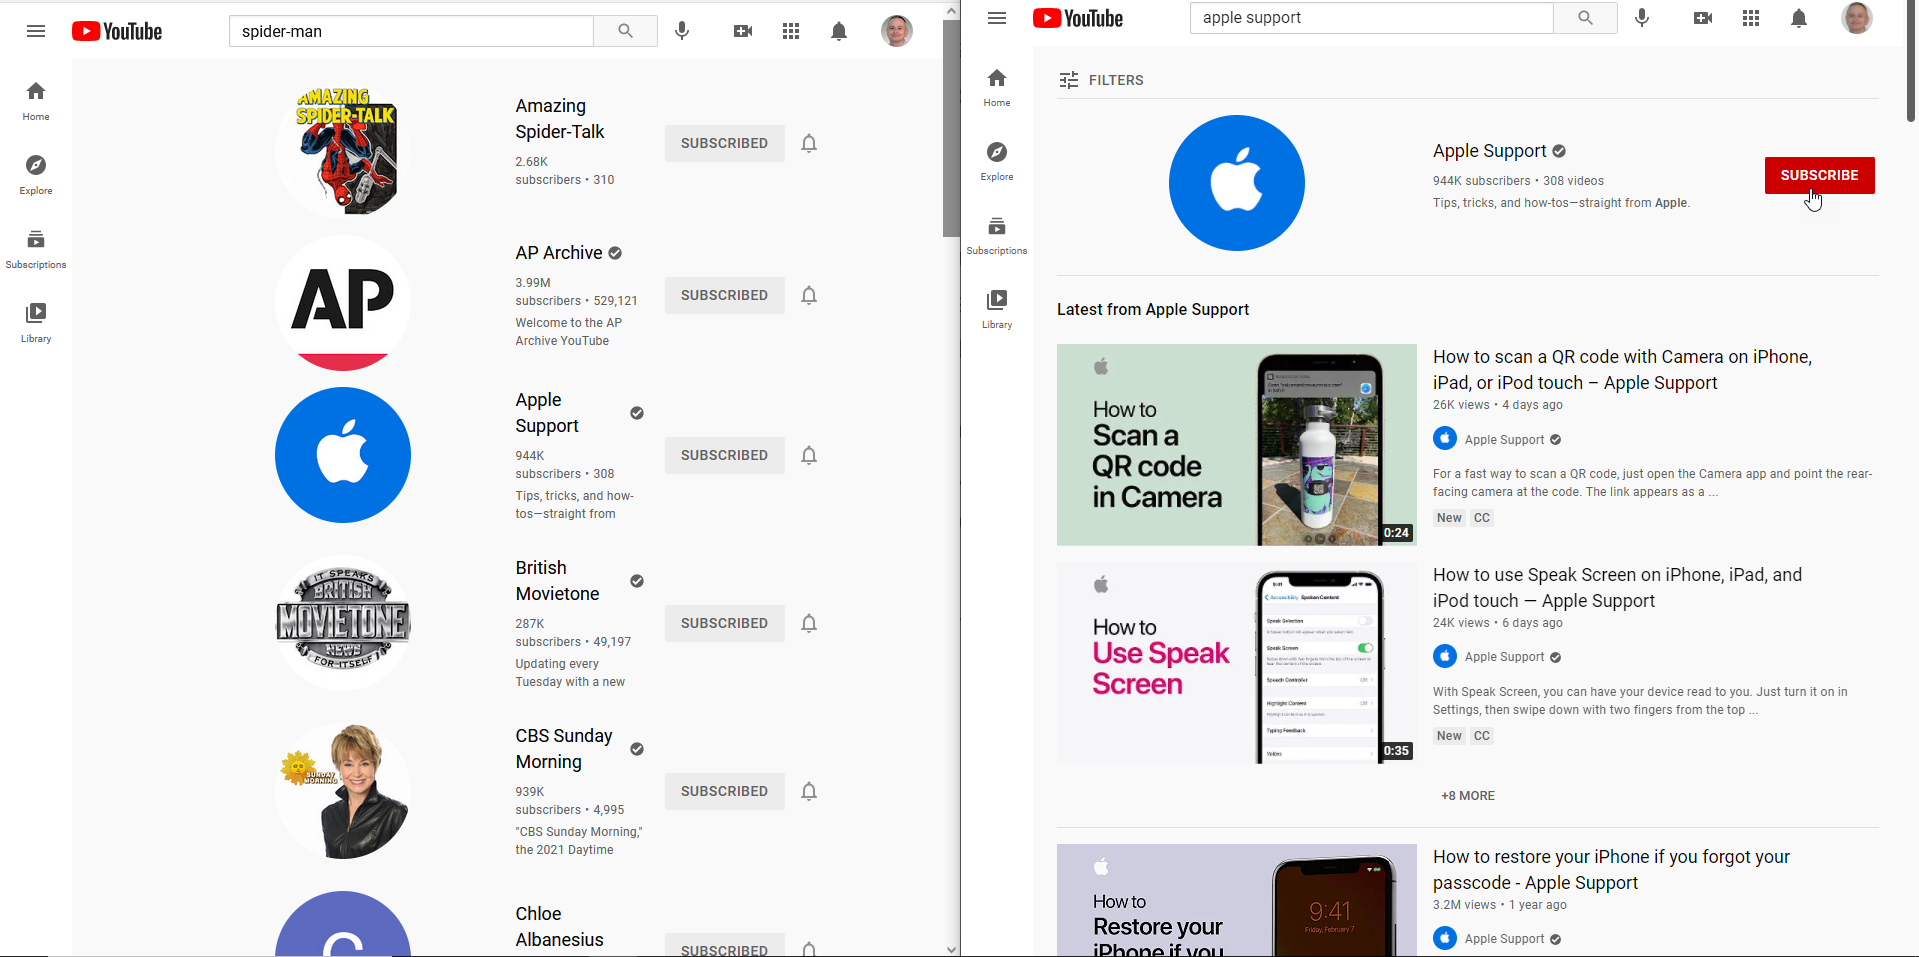 How to Move YouTube Content to a New Google Account